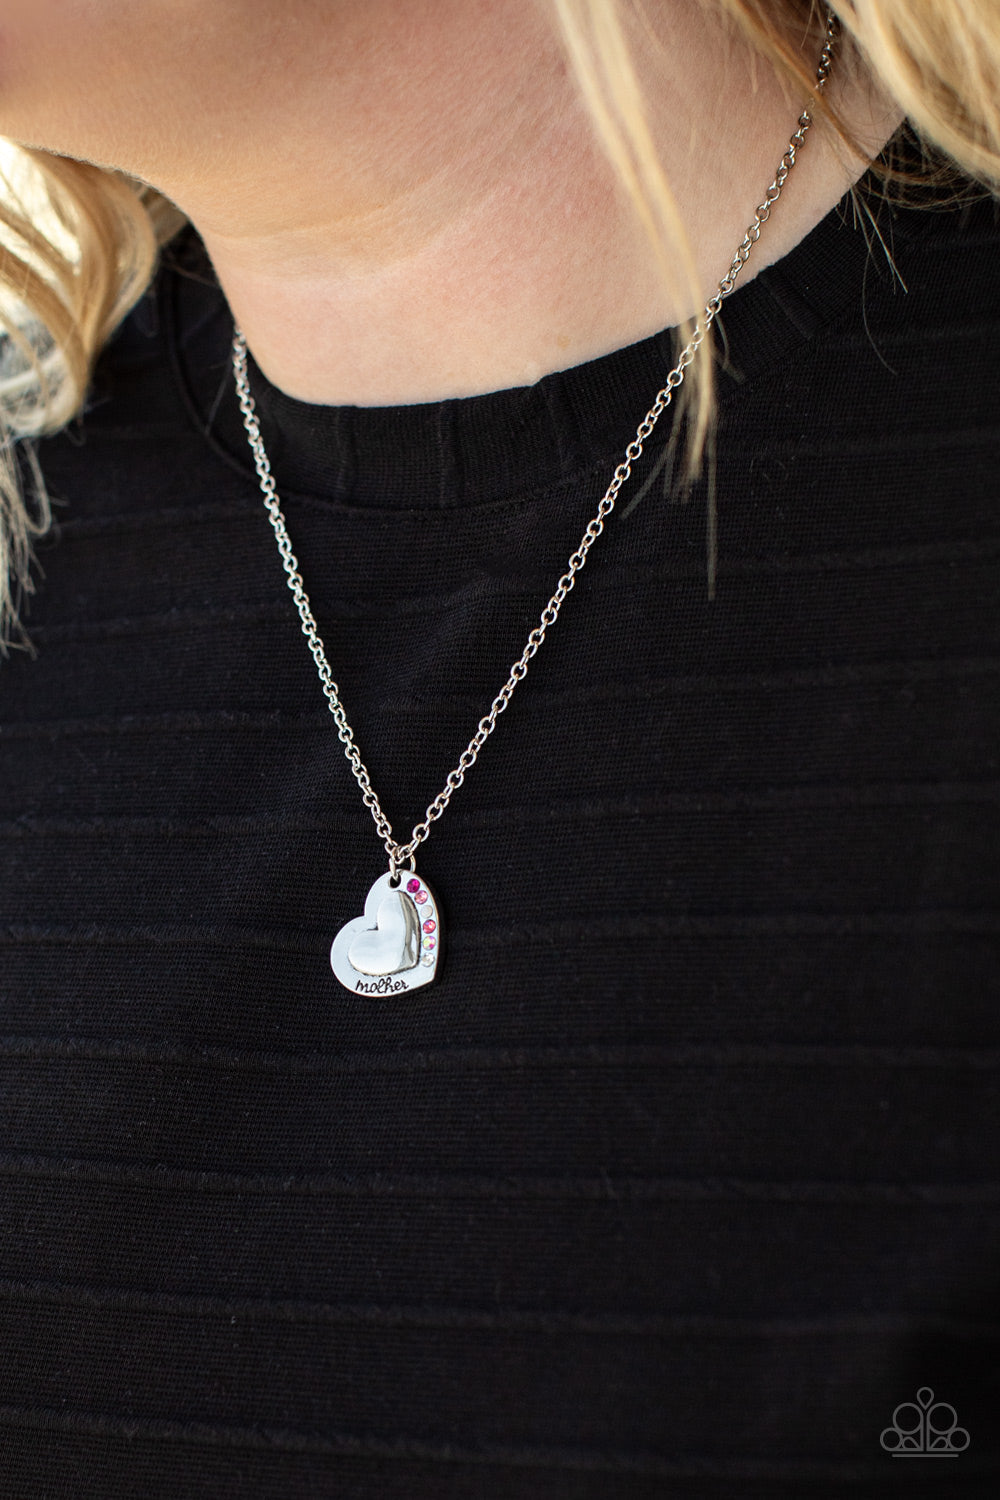 Happily Heartwarming - Pink and Silver Heart Mother Necklace - Paparazzi Accessories - Stamped in the word, "Mother," an embossed heart pendant is encrusted in a row of pink, white, and iridescent rhinestones, creating a sparkly sentimental centerpiece below the collar. Features an adjustable clasp closure.